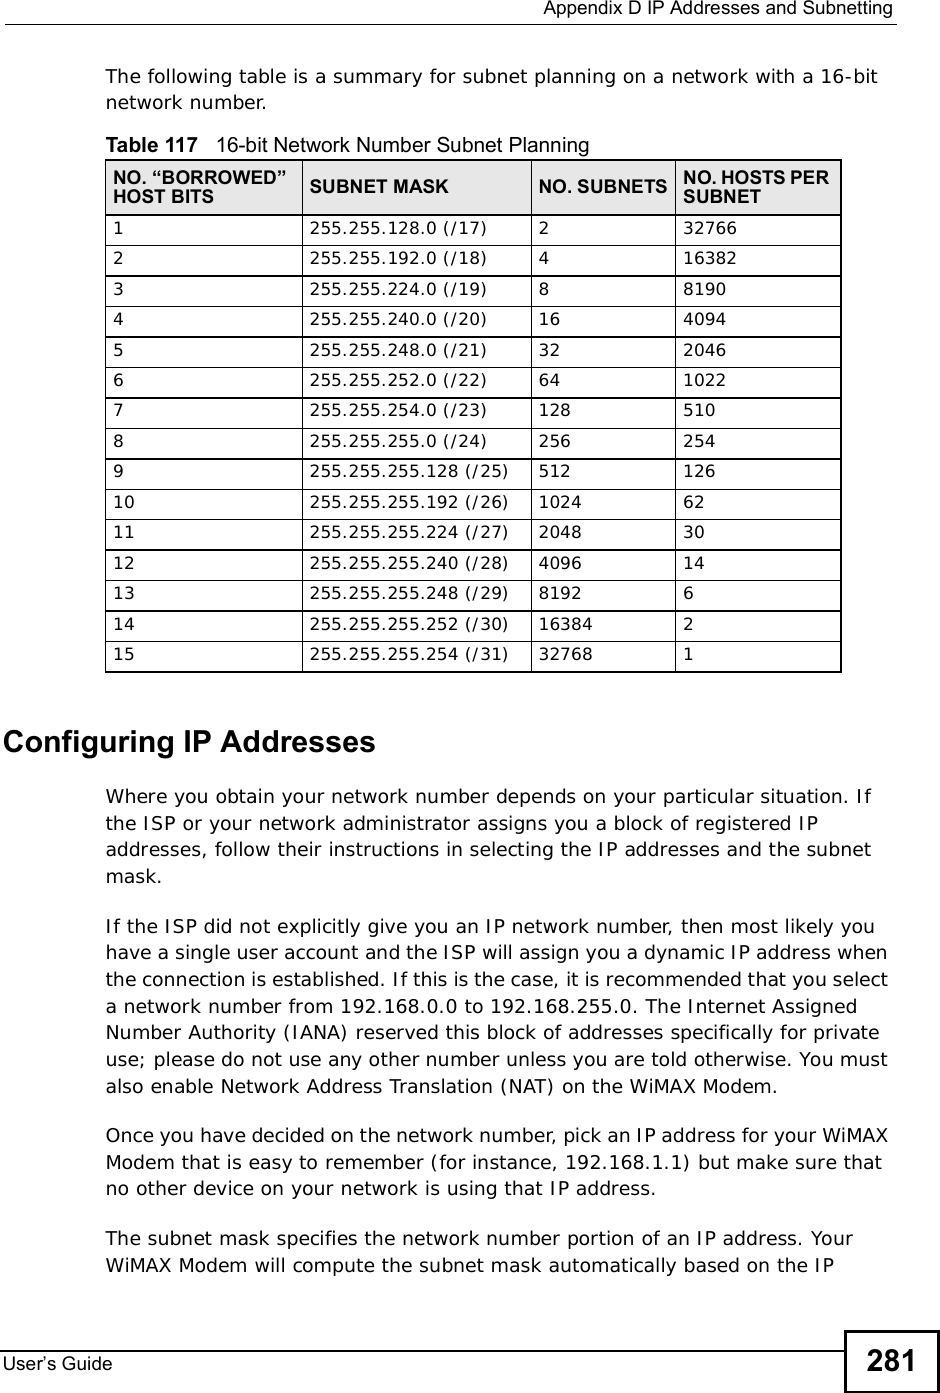  Appendix DIP Addresses and SubnettingUser s Guide 281The following table is a summary for subnet planning on a network with a 16-bit network number. Configuring IP AddressesWhere you obtain your network number depends on your particular situation. If the ISP or your network administrator assigns you a block of registered IP addresses, follow their instructions in selecting the IP addresses and the subnet mask.If the ISP did not explicitly give you an IP network number, then most likely you have a single user account and the ISP will assign you a dynamic IP address when the connection is established. If this is the case, it is recommended that you select a network number from 192.168.0.0 to 192.168.255.0. The Internet Assigned Number Authority (IANA) reserved this block of addresses specifically for private use; please do not use any other number unless you are told otherwise. You must also enable Network Address Translation (NAT) on the WiMAX Modem. Once you have decided on the network number, pick an IP address for your WiMAX Modem that is easy to remember (for instance, 192.168.1.1) but make sure that no other device on your network is using that IP address.The subnet mask specifies the network number portion of an IP address. Your WiMAX Modem will compute the subnet mask automatically based on the IP Table 117   16-bit Network Number Subnet PlanningNO. “BORROWED” HOST BITS SUBNET MASK NO. SUBNETS NO. HOSTS PER SUBNET1255.255.128.0 (/17) 2 327662 255.255.192.0 (/18) 4 163823 255.255.224.0 (/19) 8 81904255.255.240.0 (/20) 16 40945255.255.248.0 (/21) 32 20466255.255.252.0 (/22) 64 10227255.255.254.0 (/23) 128 5108 255.255.255.0 (/24) 256 2549 255.255.255.128 (/25) 512 12610 255.255.255.192 (/26) 1024 6211 255.255.255.224 (/27) 2048 3012 255.255.255.240 (/28) 4096 1413 255.255.255.248 (/29) 8192 614 255.255.255.252 (/30) 16384 215 255.255.255.254 (/31) 32768 1